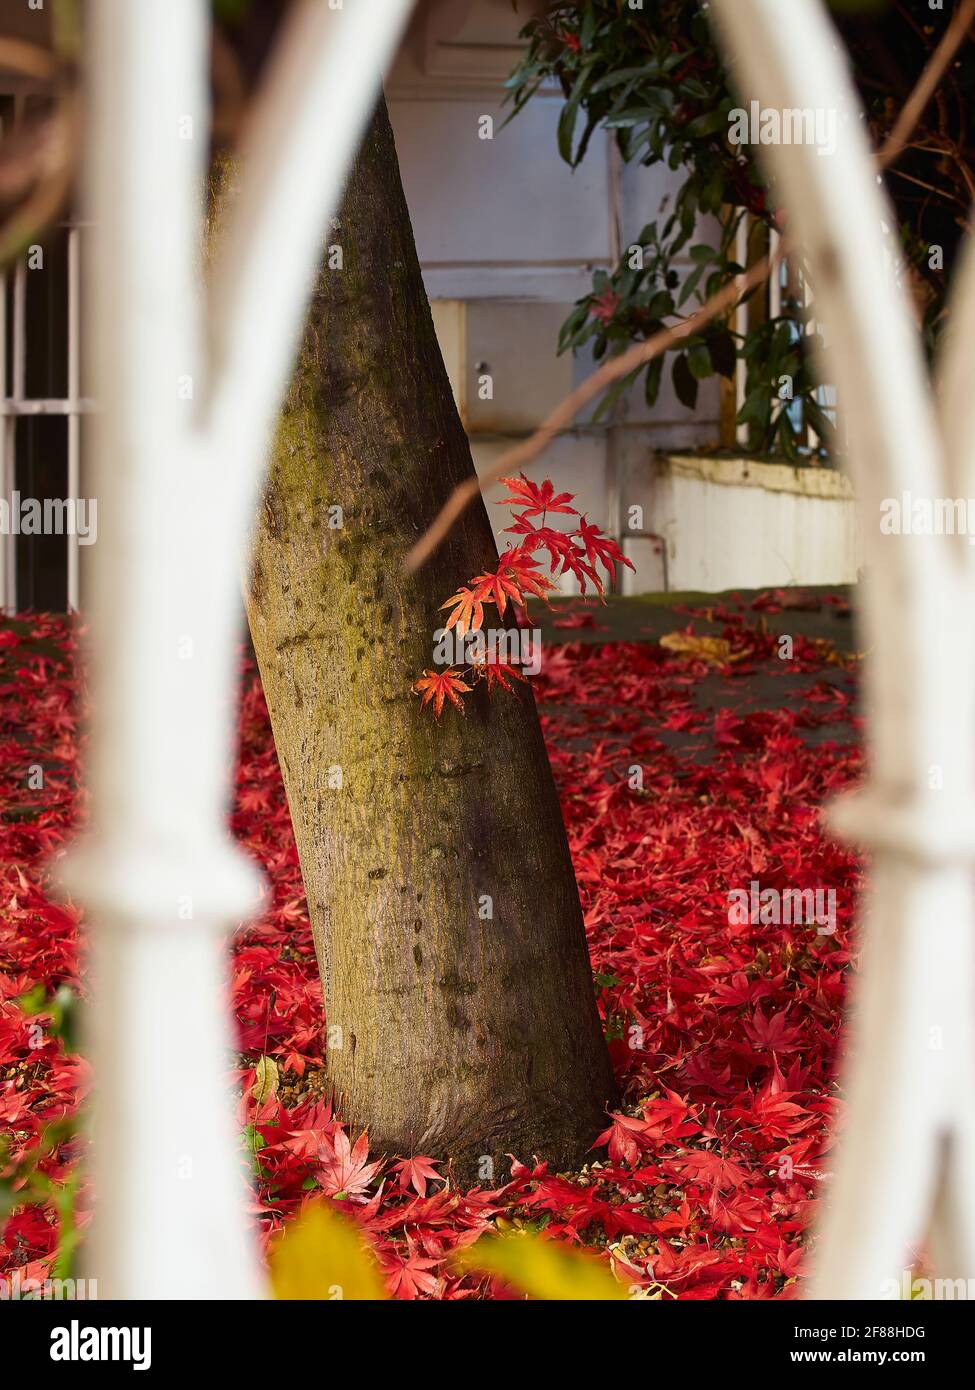 The bright red foliage from an acer tree, with a new branch emerging from the trunk, seen through ornate ironwork. Stock Photo